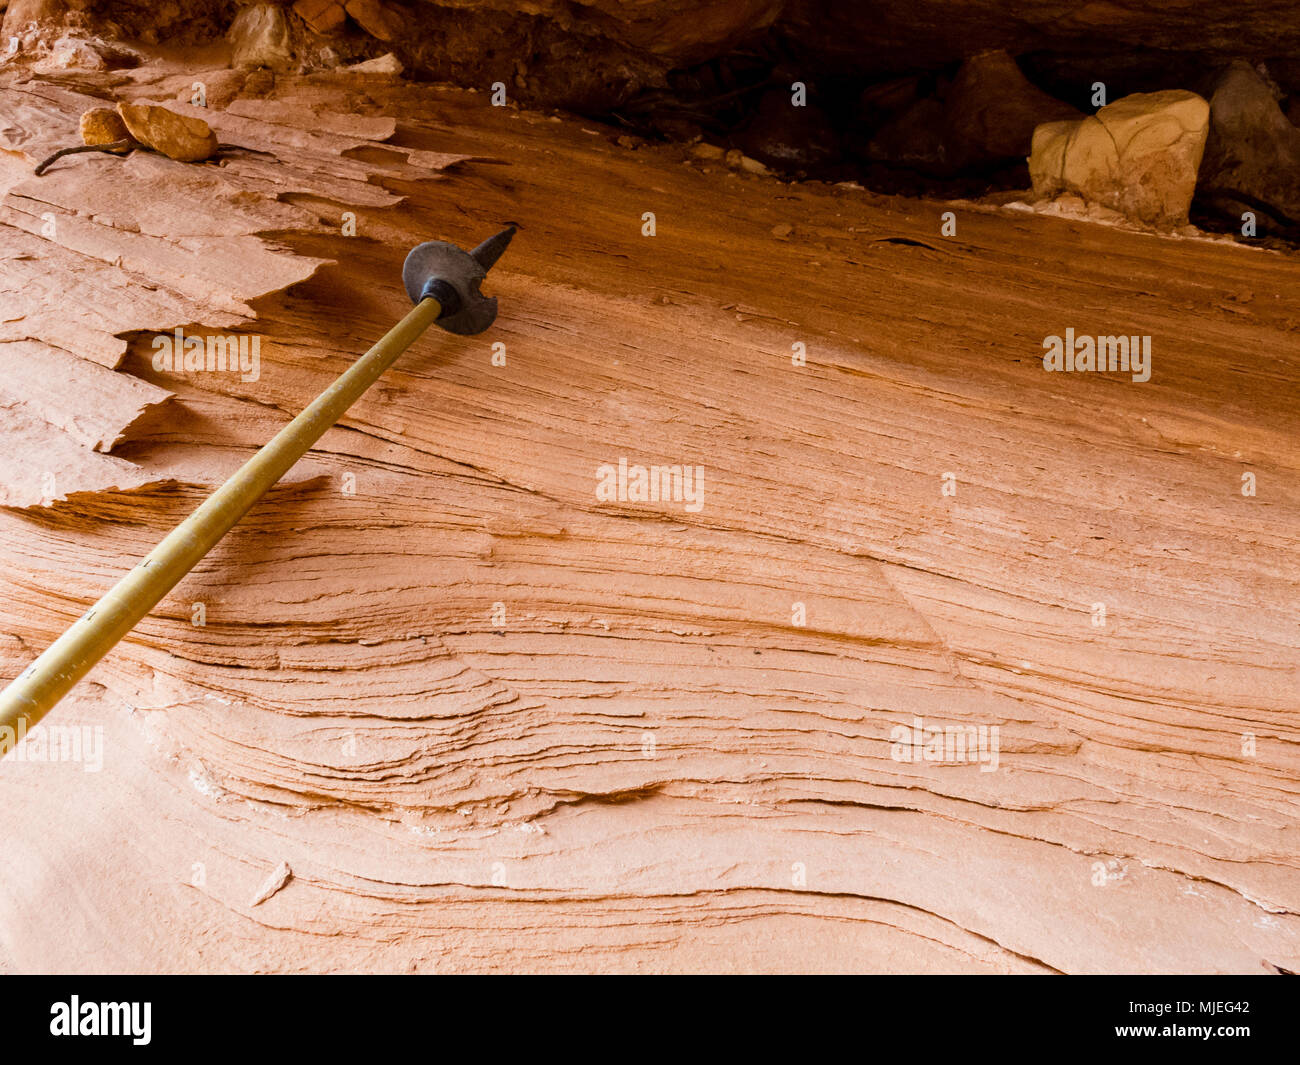 Lithification of sand dunes is the process turning  unconsolidated sand into the rock known as sandstone, common in the southwest of the United States Stock Photo